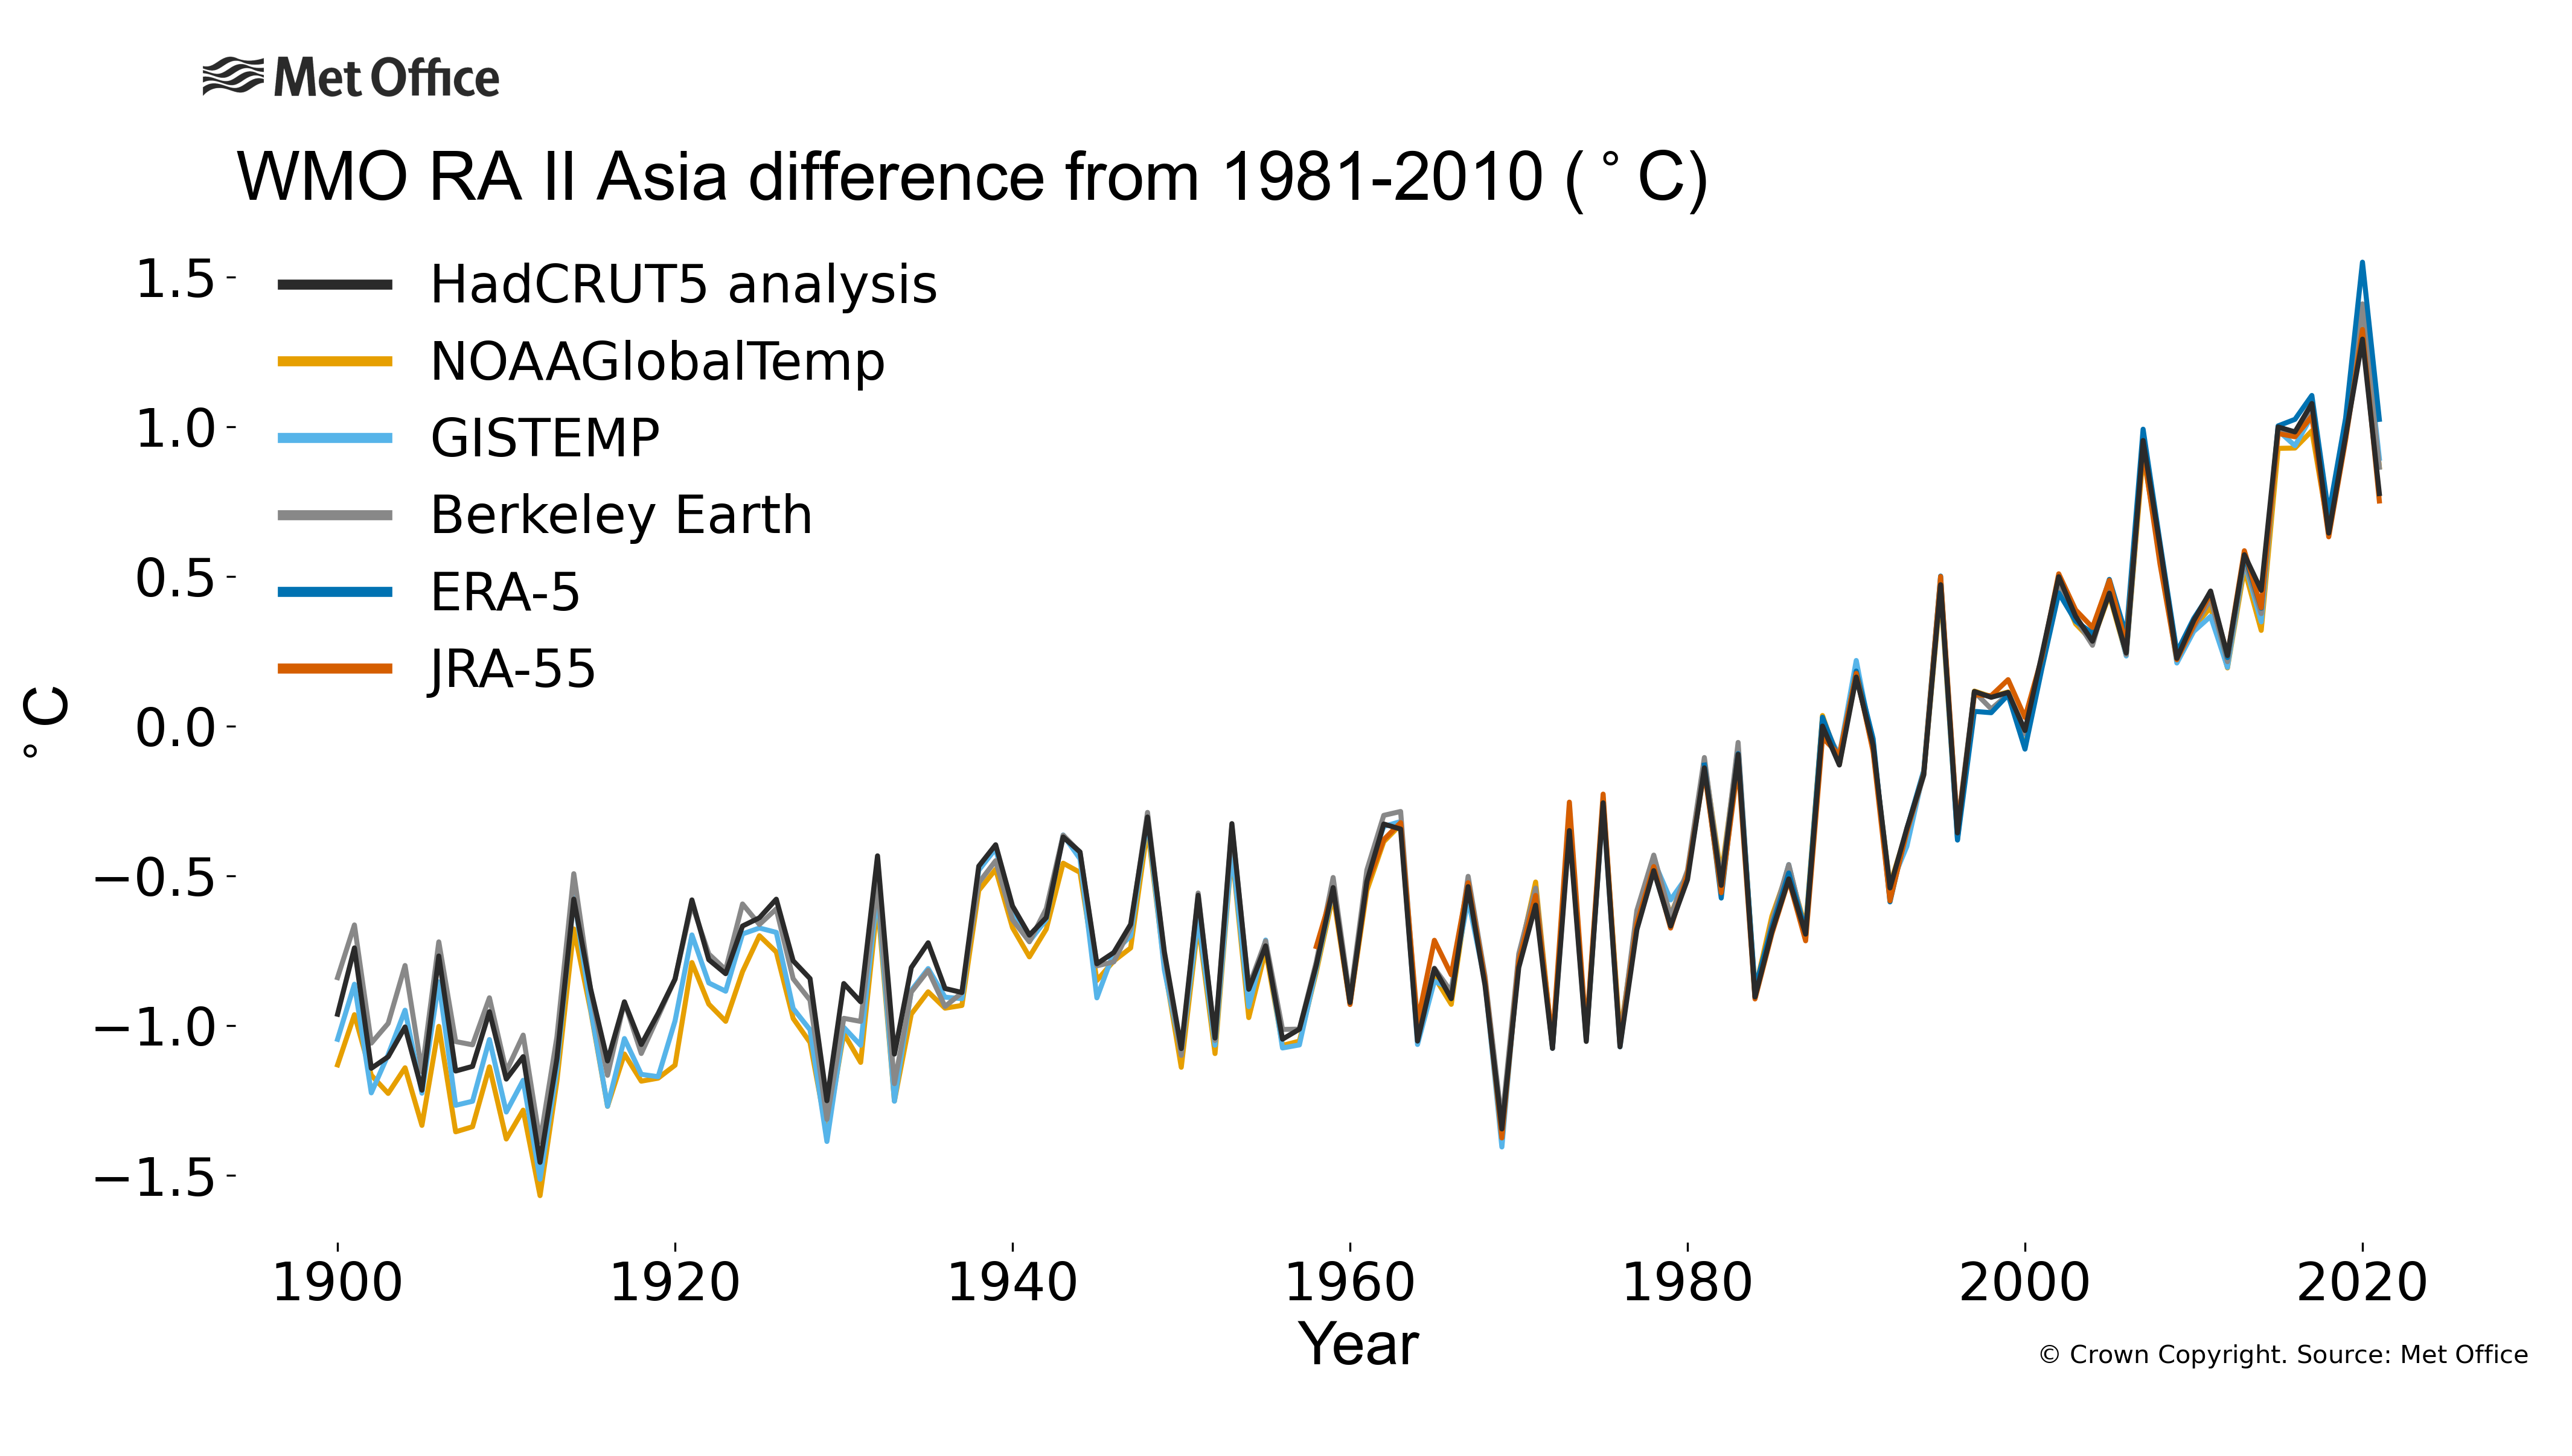 
The plot shows annual average temperature anomalies (relative to 1981-2010) for WMO RA I - Asia. Data are from six different data sets: HadCRUT5, NOAAGlobalTemp, GISTEMP, Berkeley Earth, ERA5 and JRA55.
